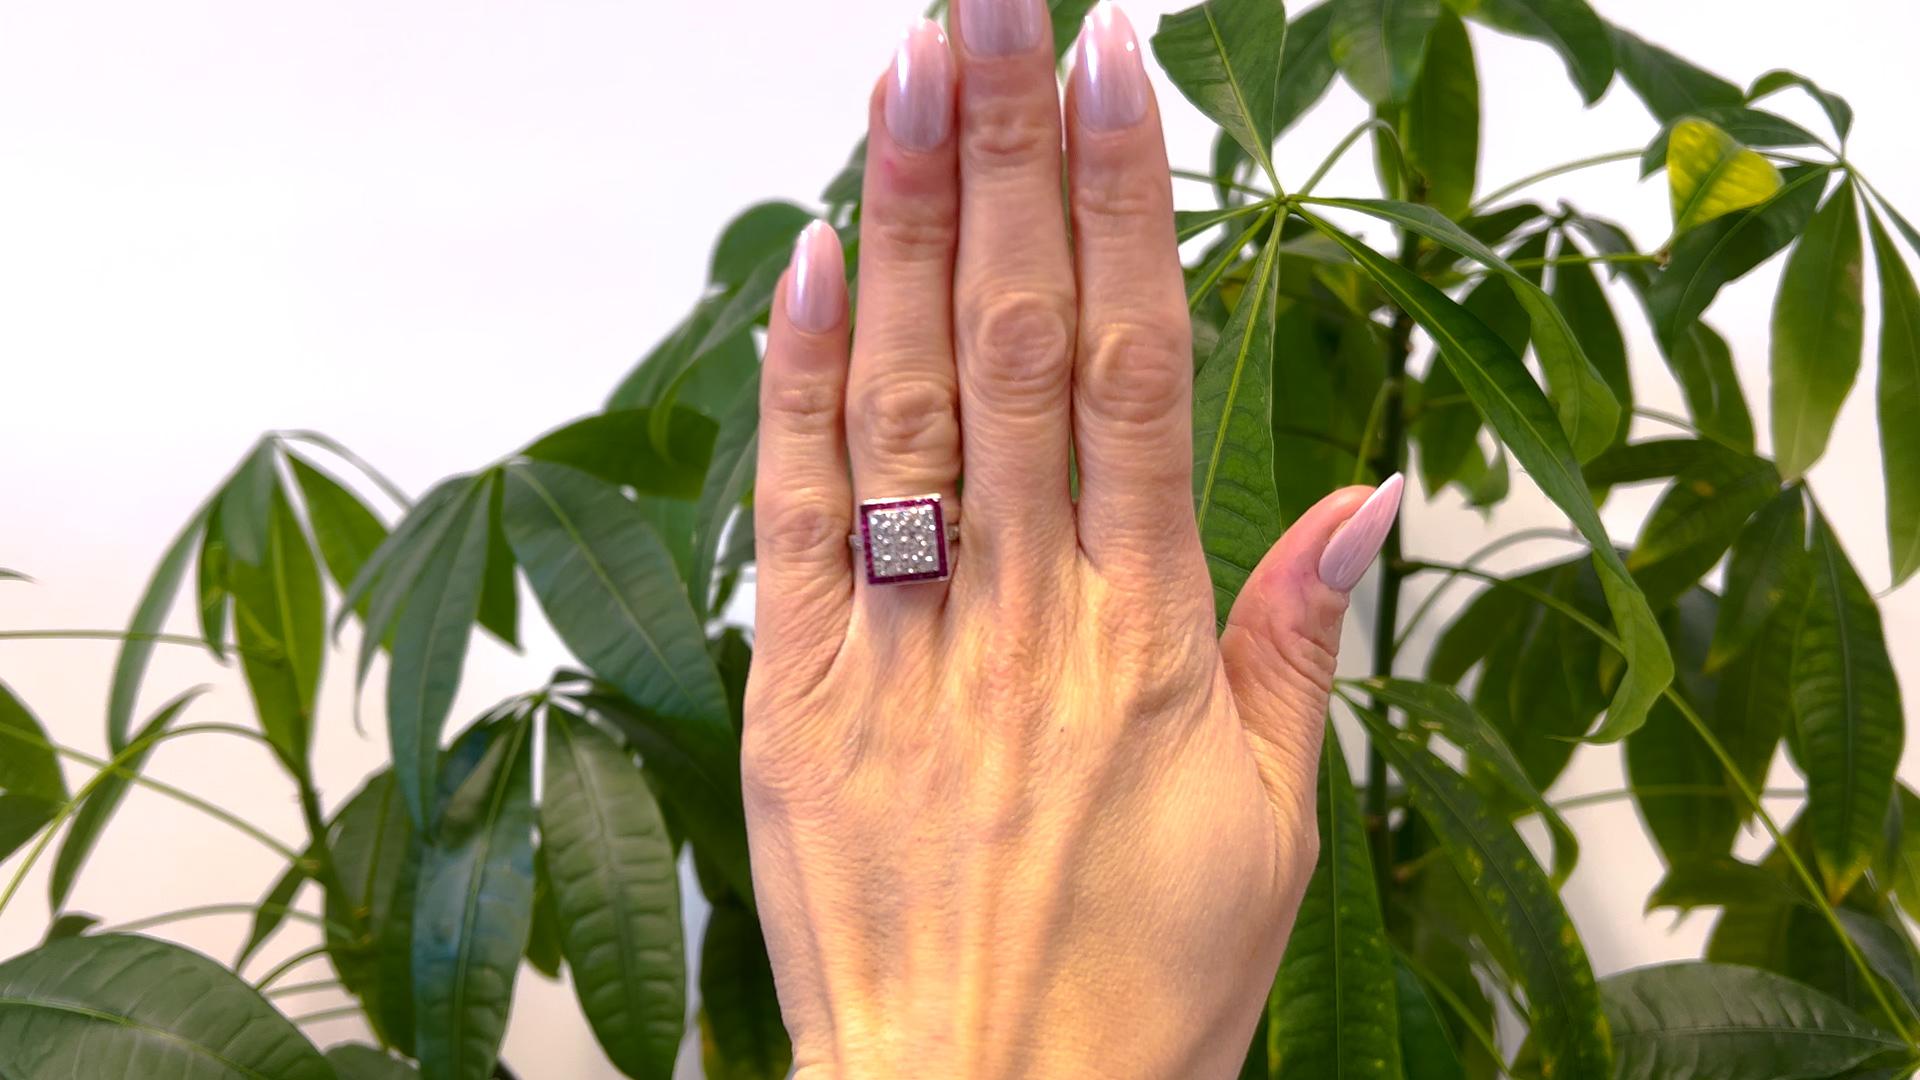 One Art Deco Inspired Diamond and Ruby Platinum Square Ring. Featuring 16 old mine cut diamonds with a total weight of approximately 1.20 carats, graded near-colorless, VS clarity. Accented by 32 French cut rubies with a total weight of